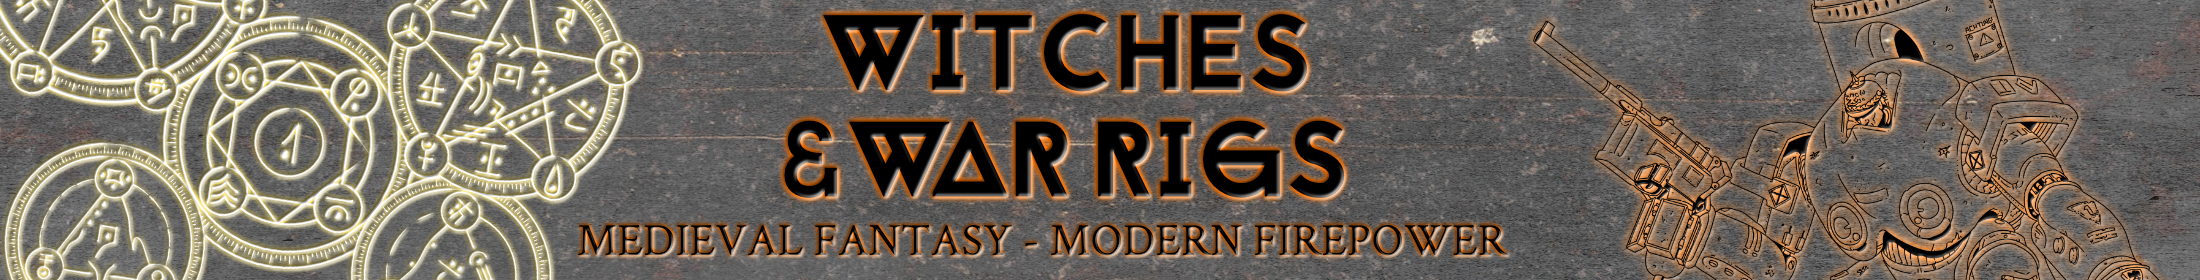 Witches &amp; War Rigs